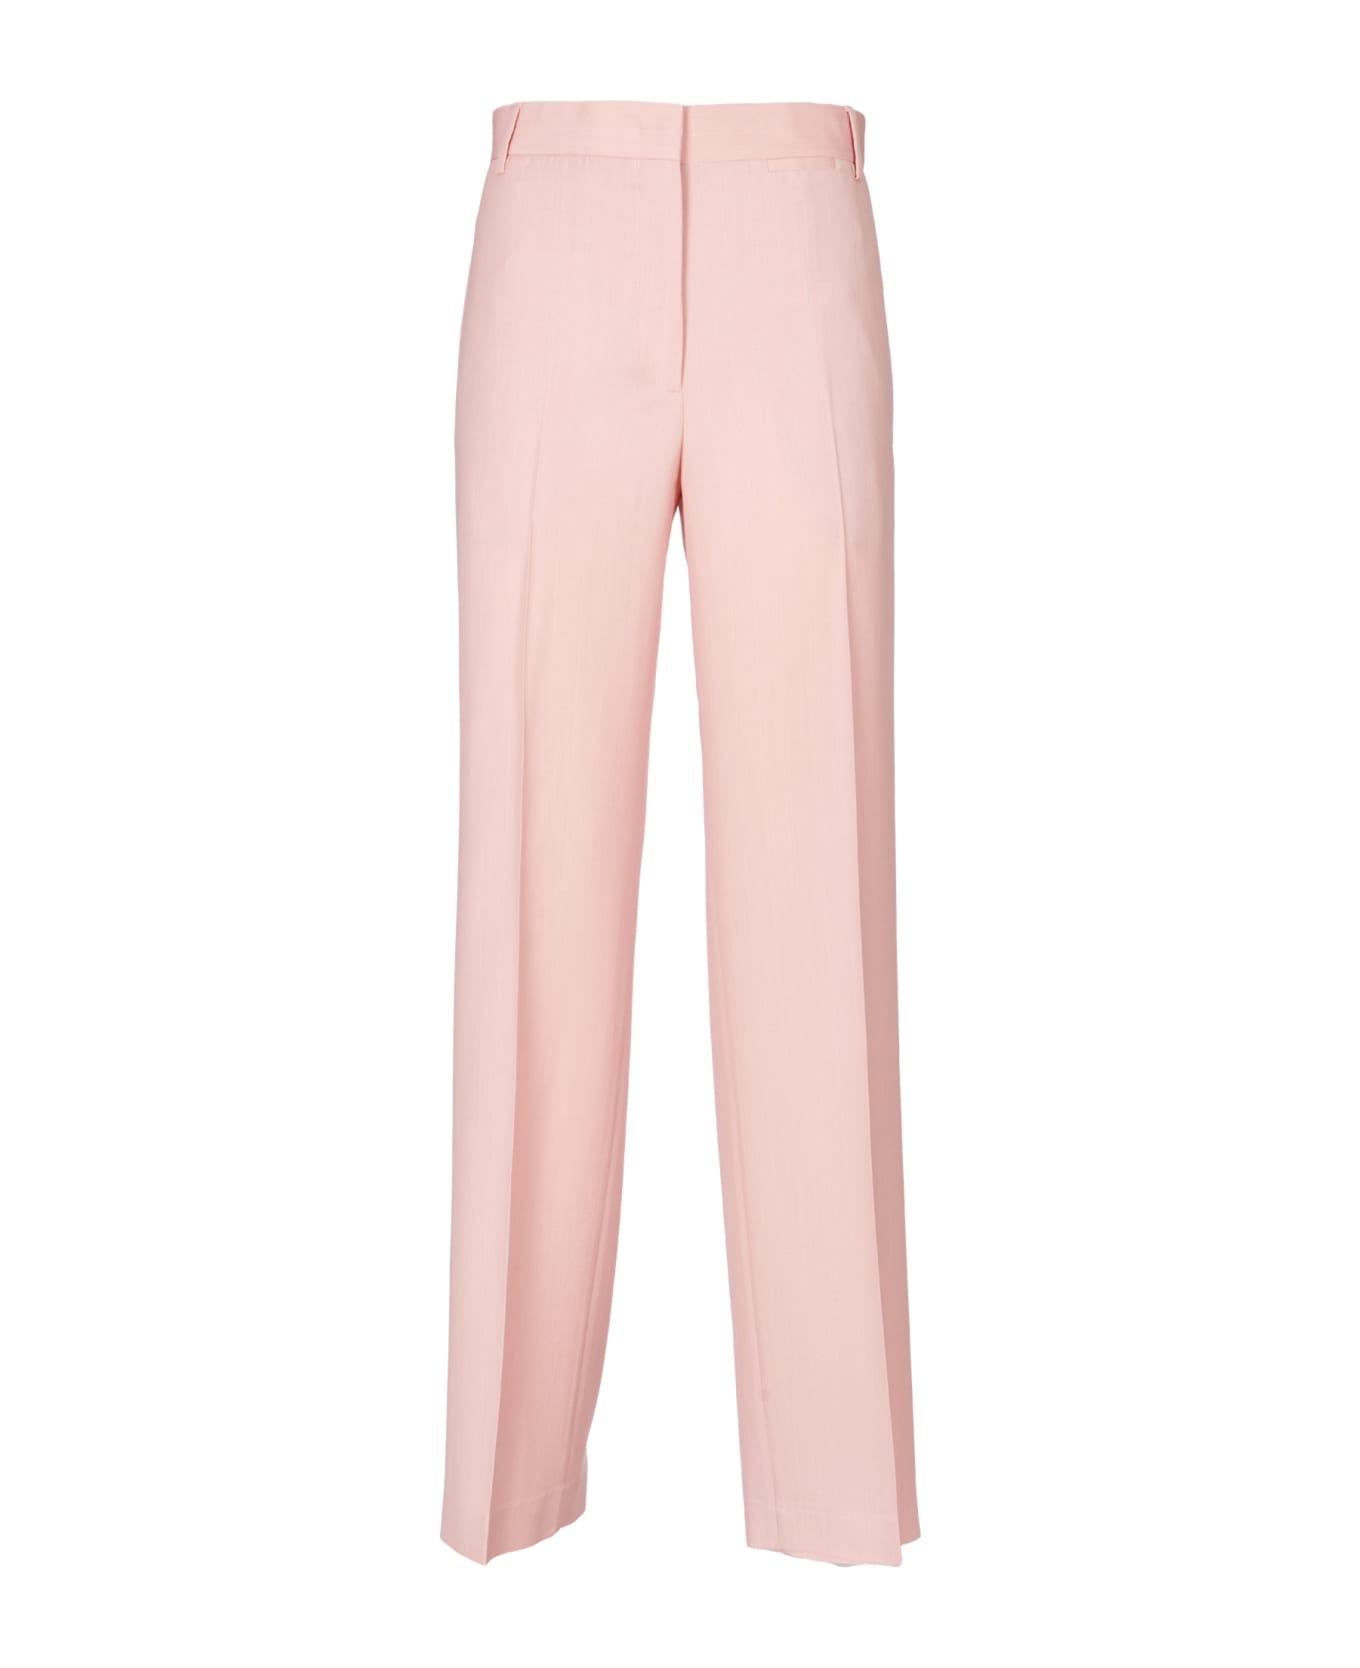 Paul Smith Trousers - Pink ボトムス